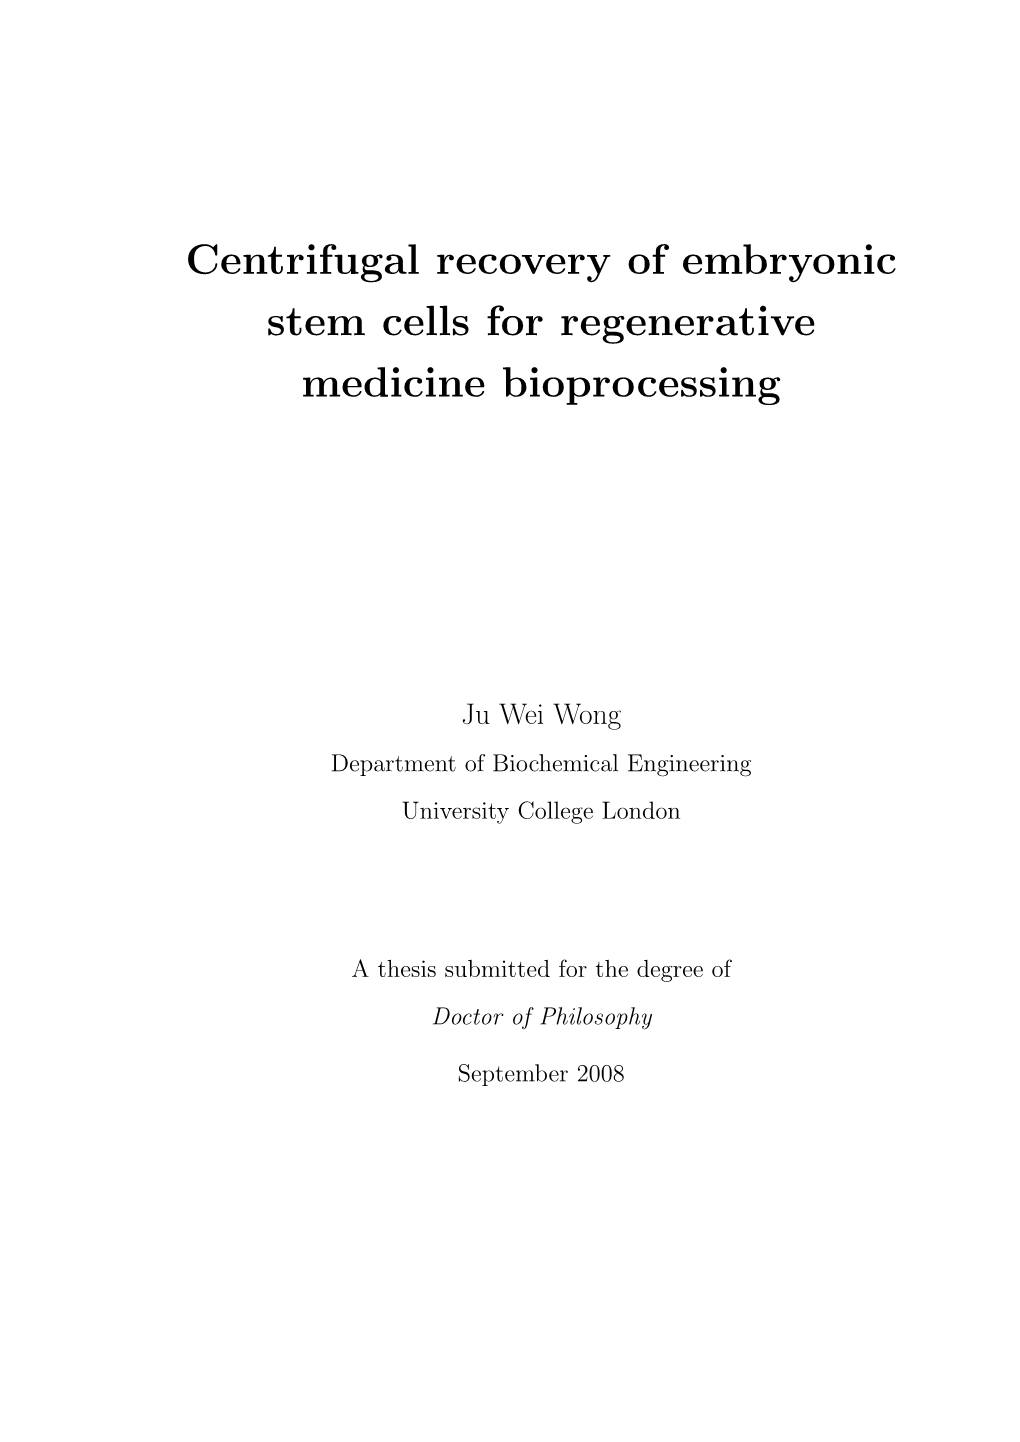 Centrifugal Recovery of Embryonic Stem Cells for Regenerative Medicine Bioprocessing